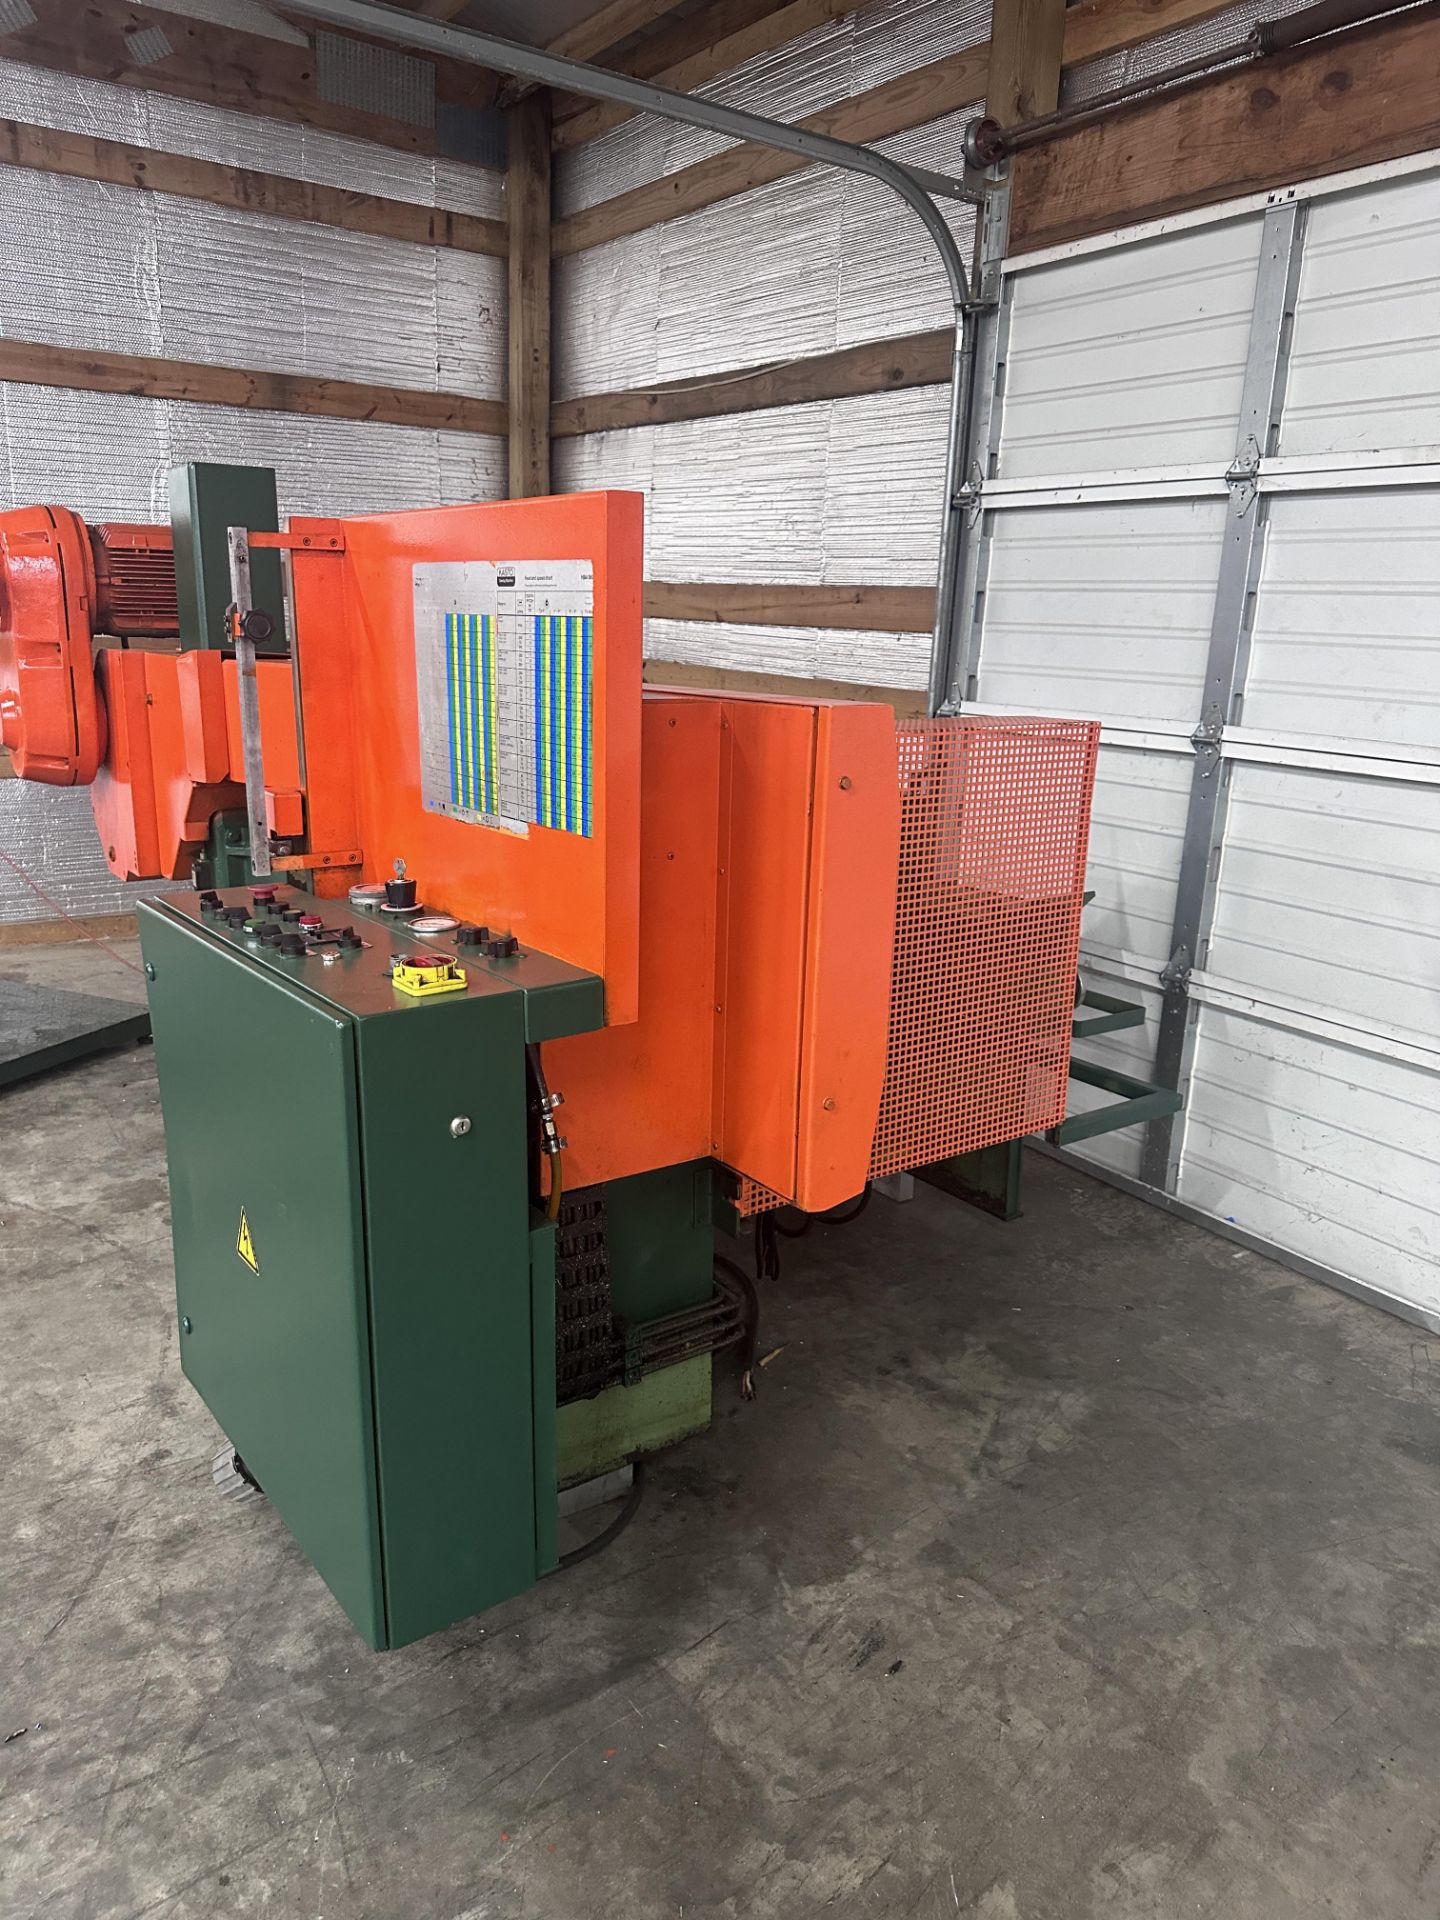 KASTO MODEL 360 AU 14"X14" AUTOMATIC HORIZONTAL BANDSAW, (2) SAWS SOLD AS 1 LOT - Image 9 of 10